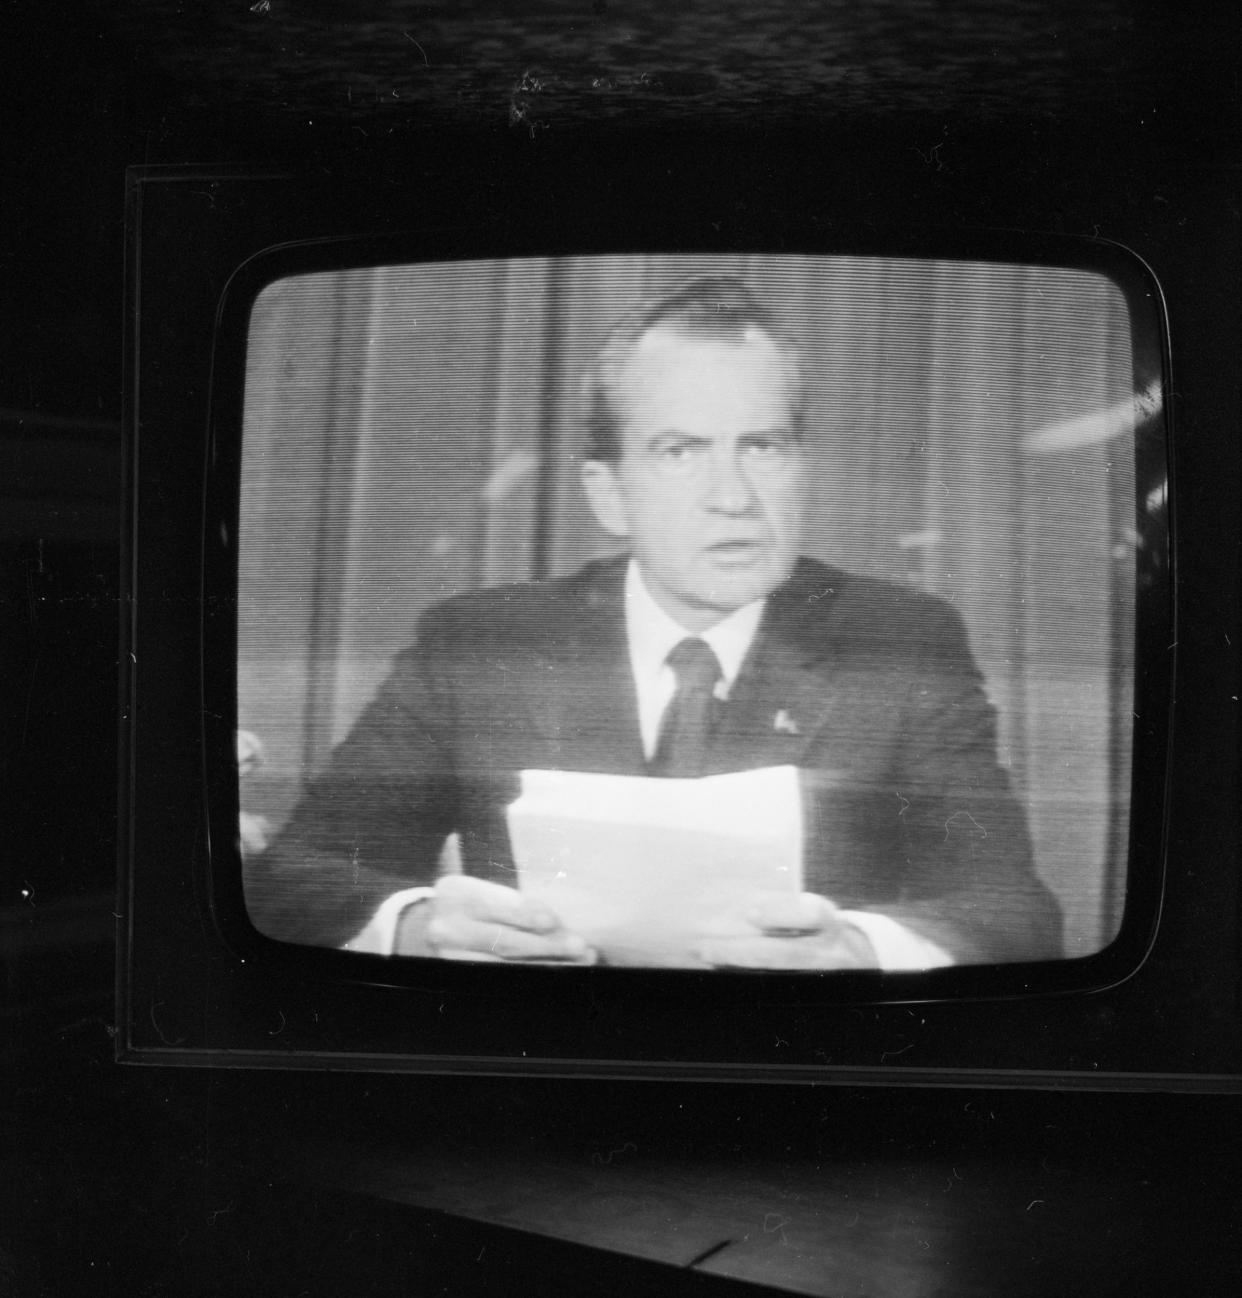 A photo of Richard Nixon when he announced his resignation on television: Getty Images